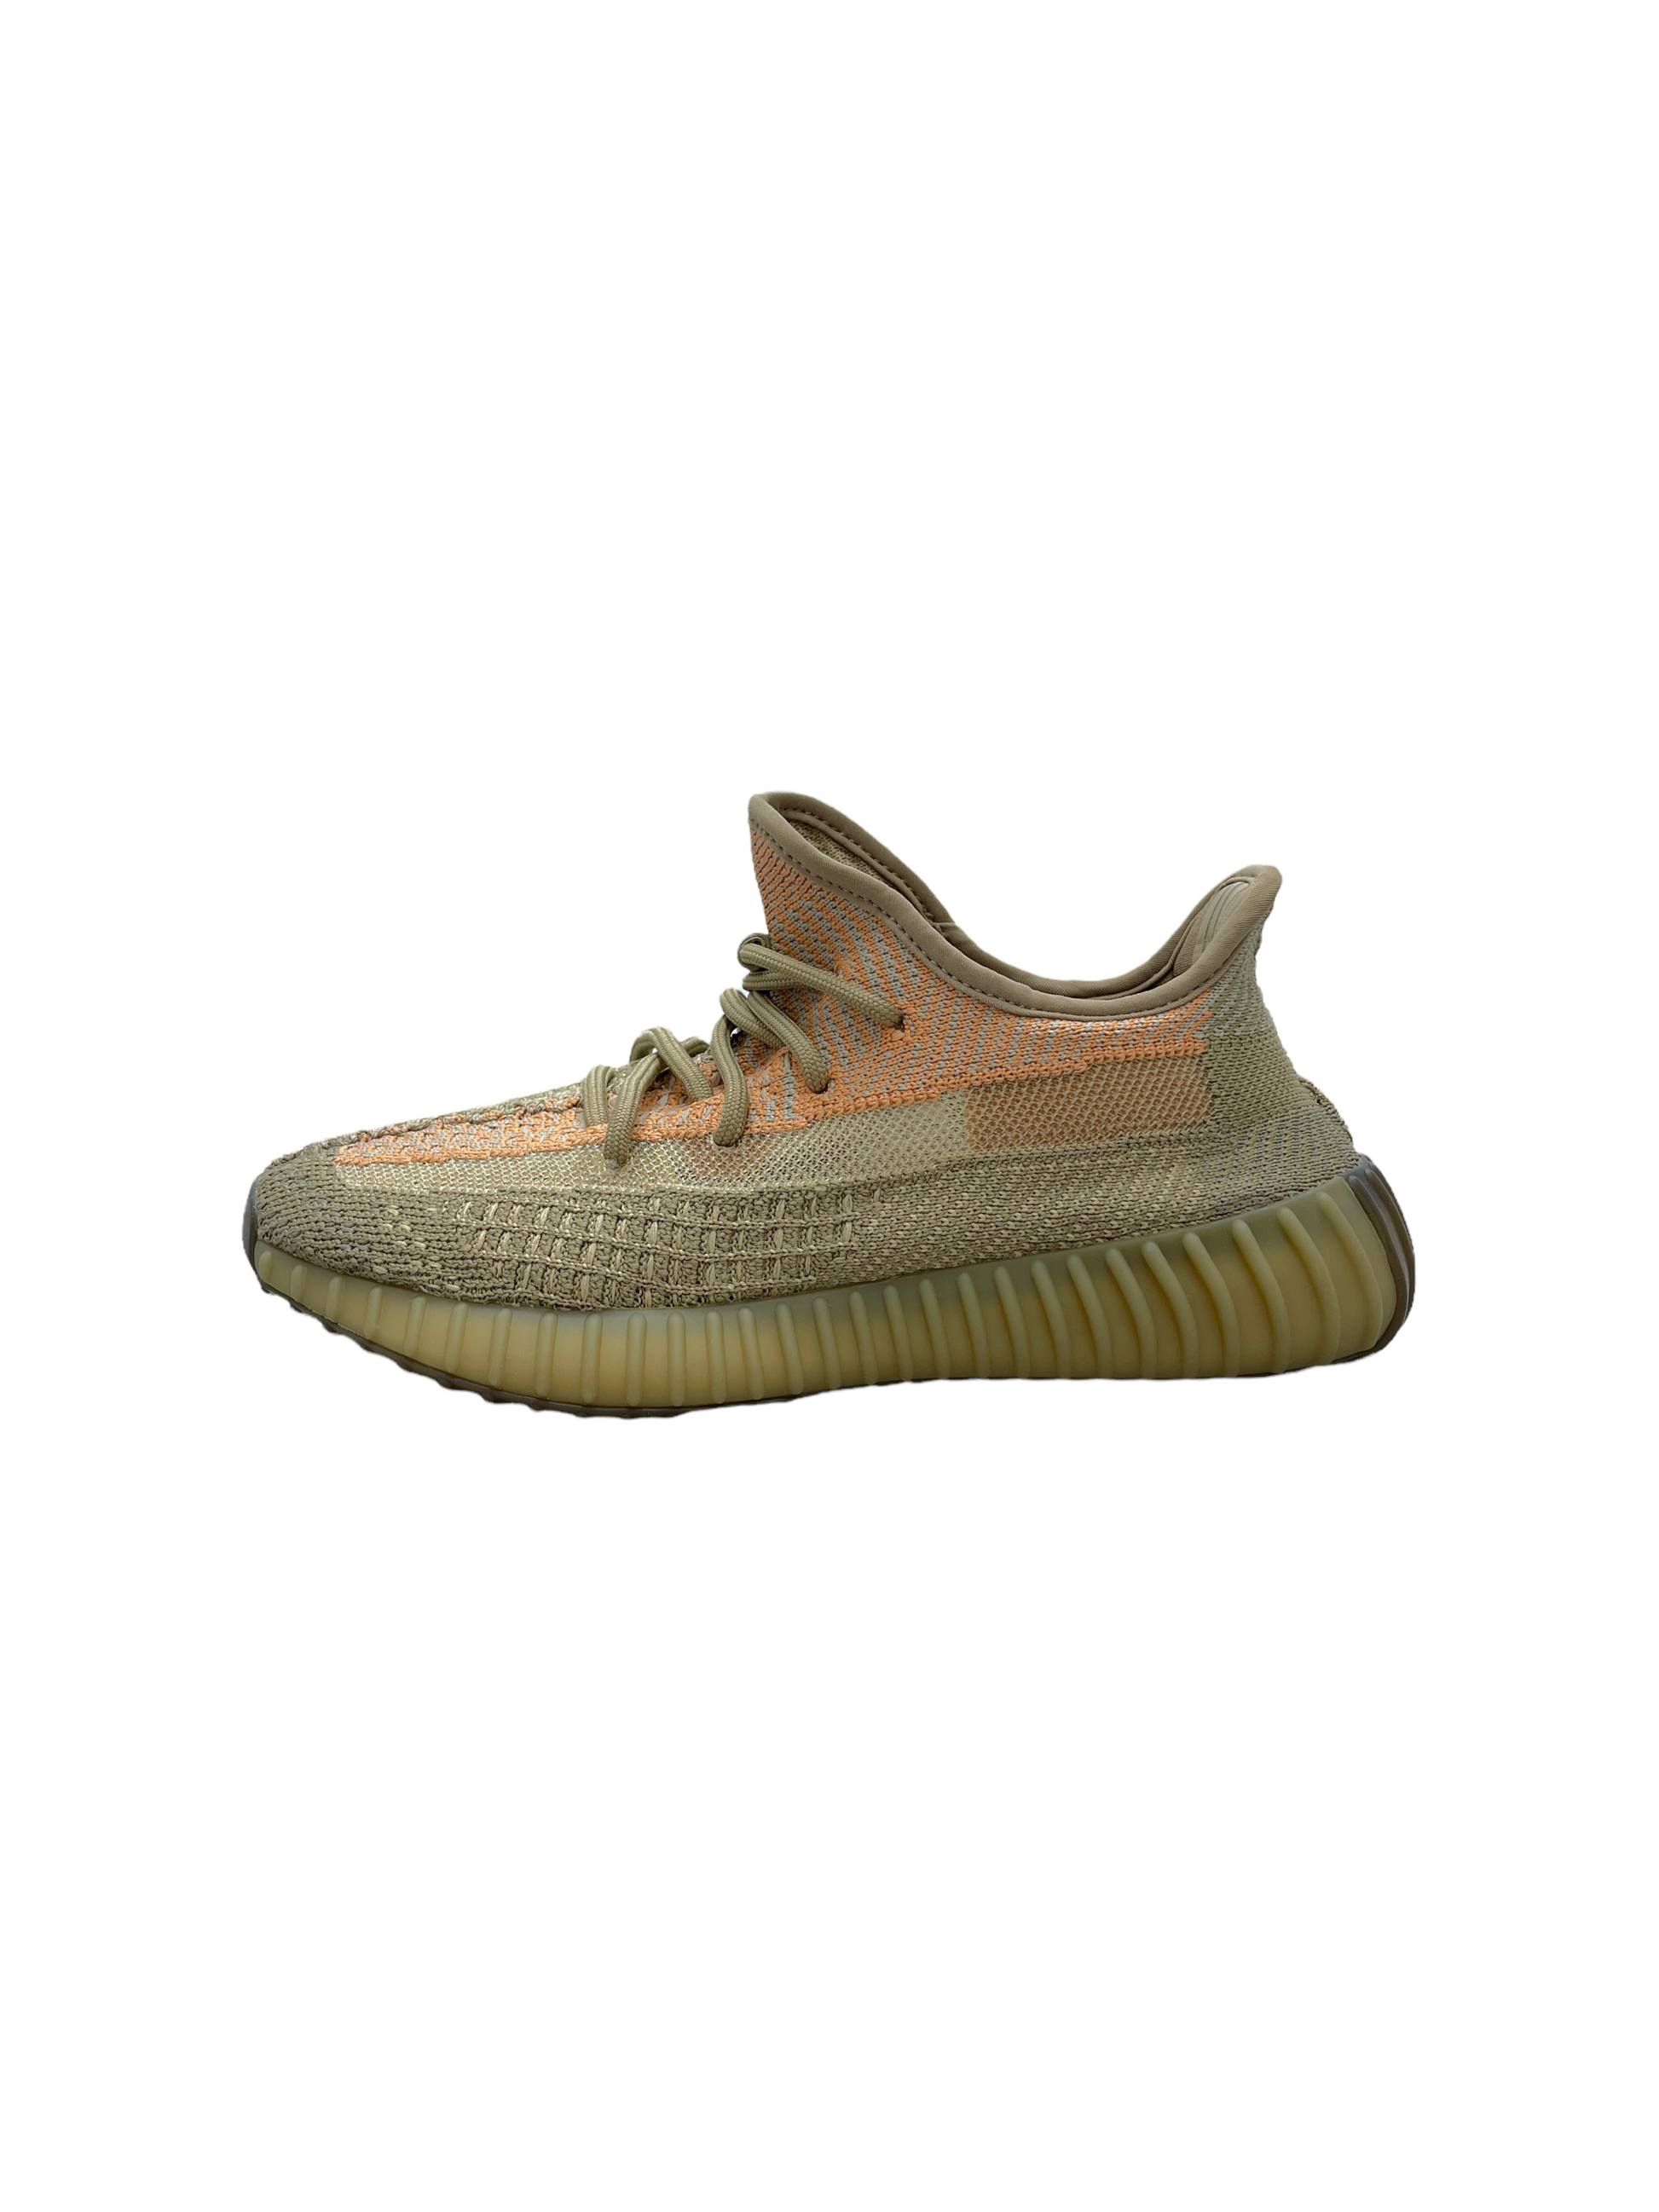 Adidas Yeezy 350 v2 Sand Taupe Sneakers - Genuine Design Luxury Consignment for Men. New & Pre-Owned Clothing, Shoes, & Accessories. Calgary, Canada